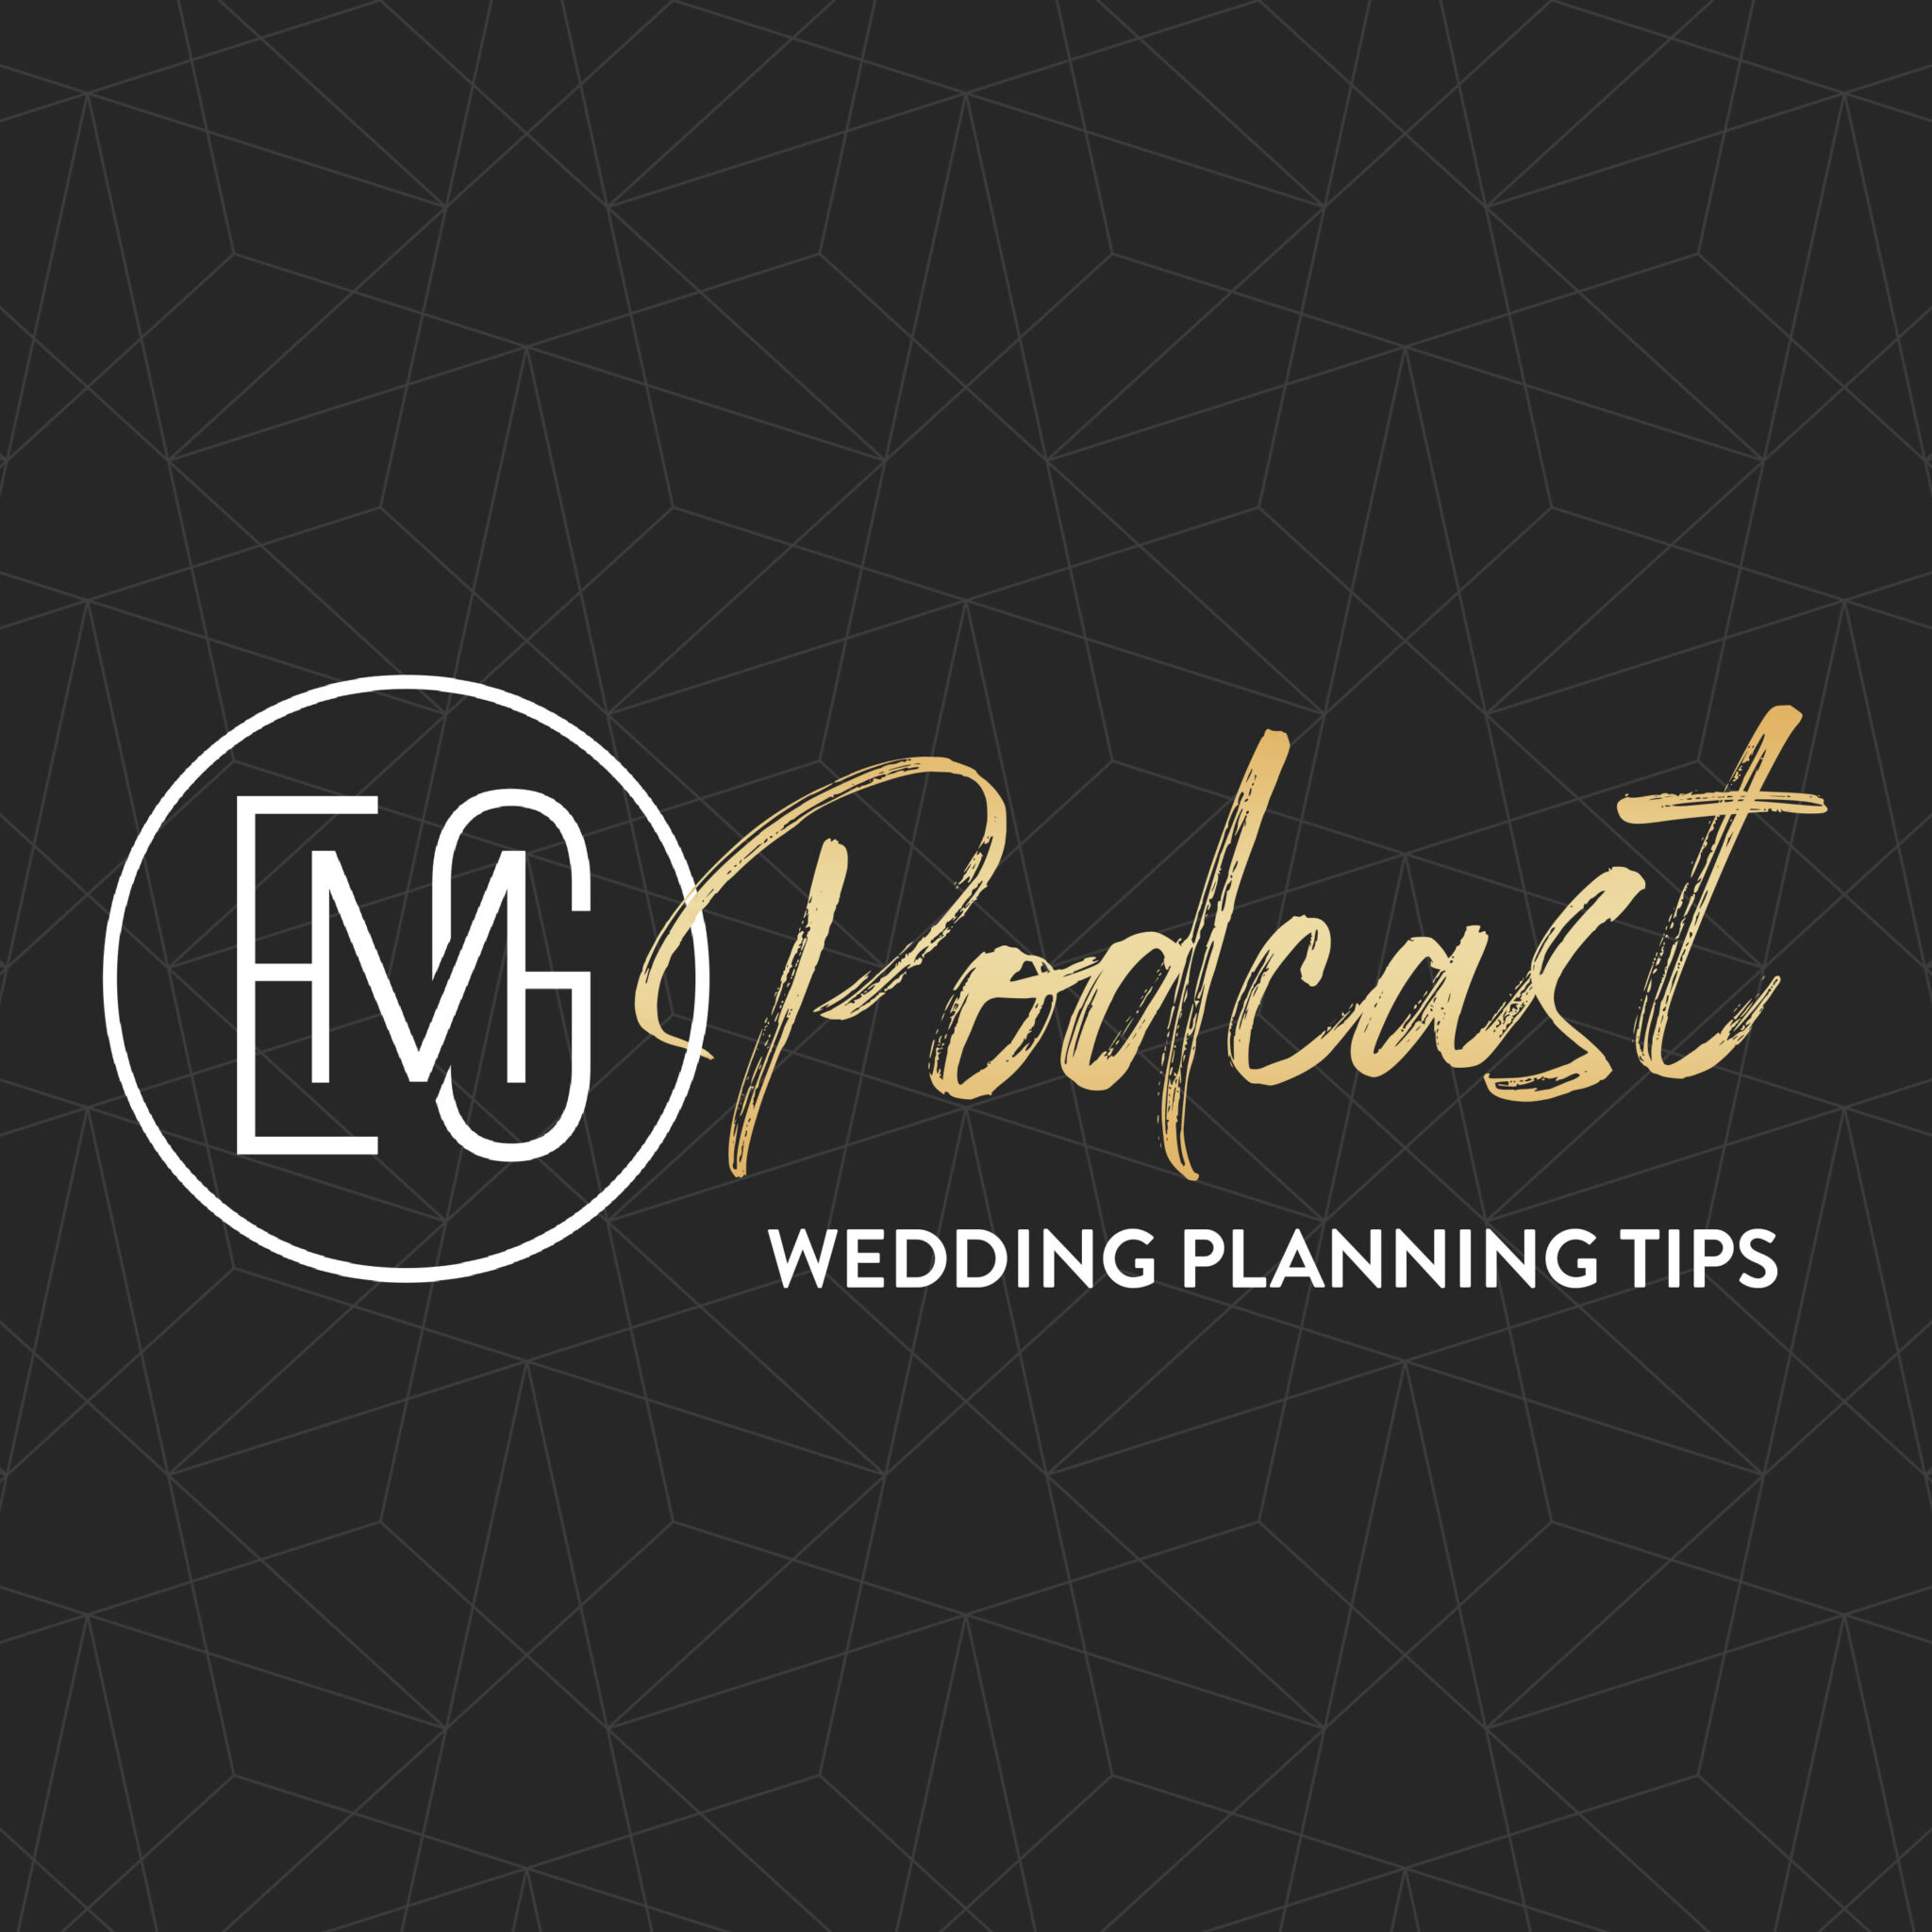 Planning Tips: EMG Facebook Live Q+A On Holiday Weddings